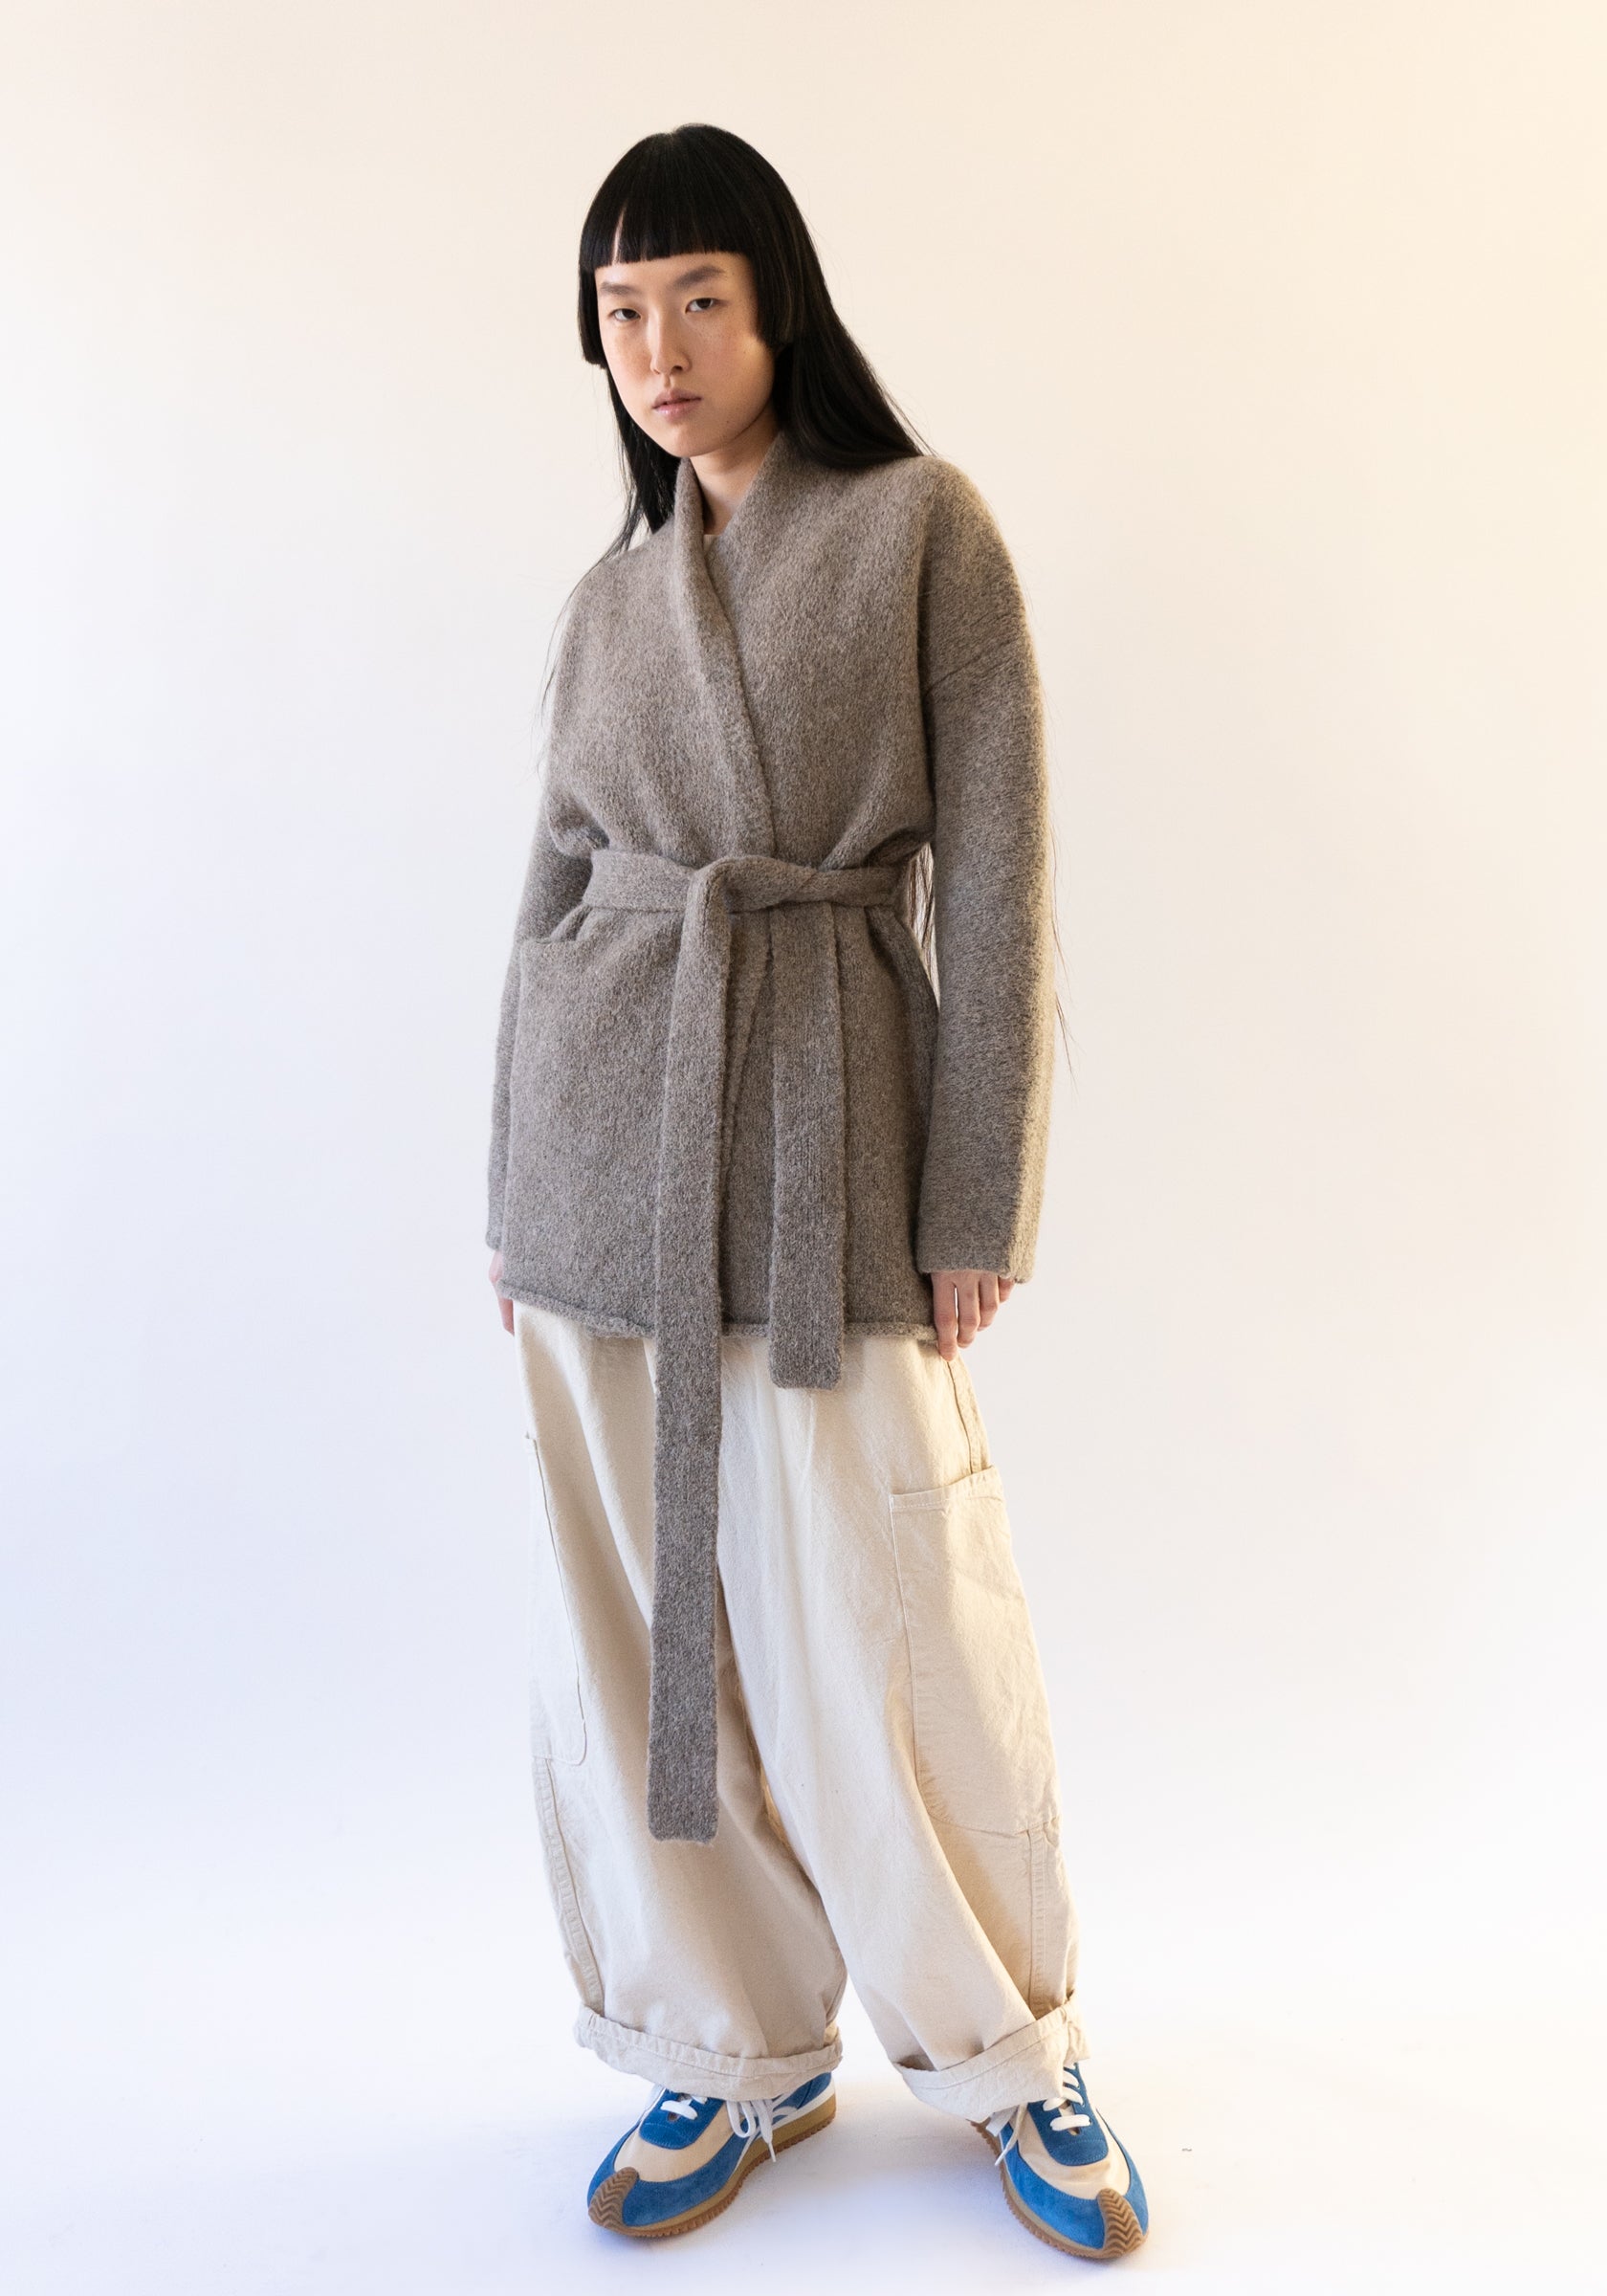 Coto Cardigan in Driftwood